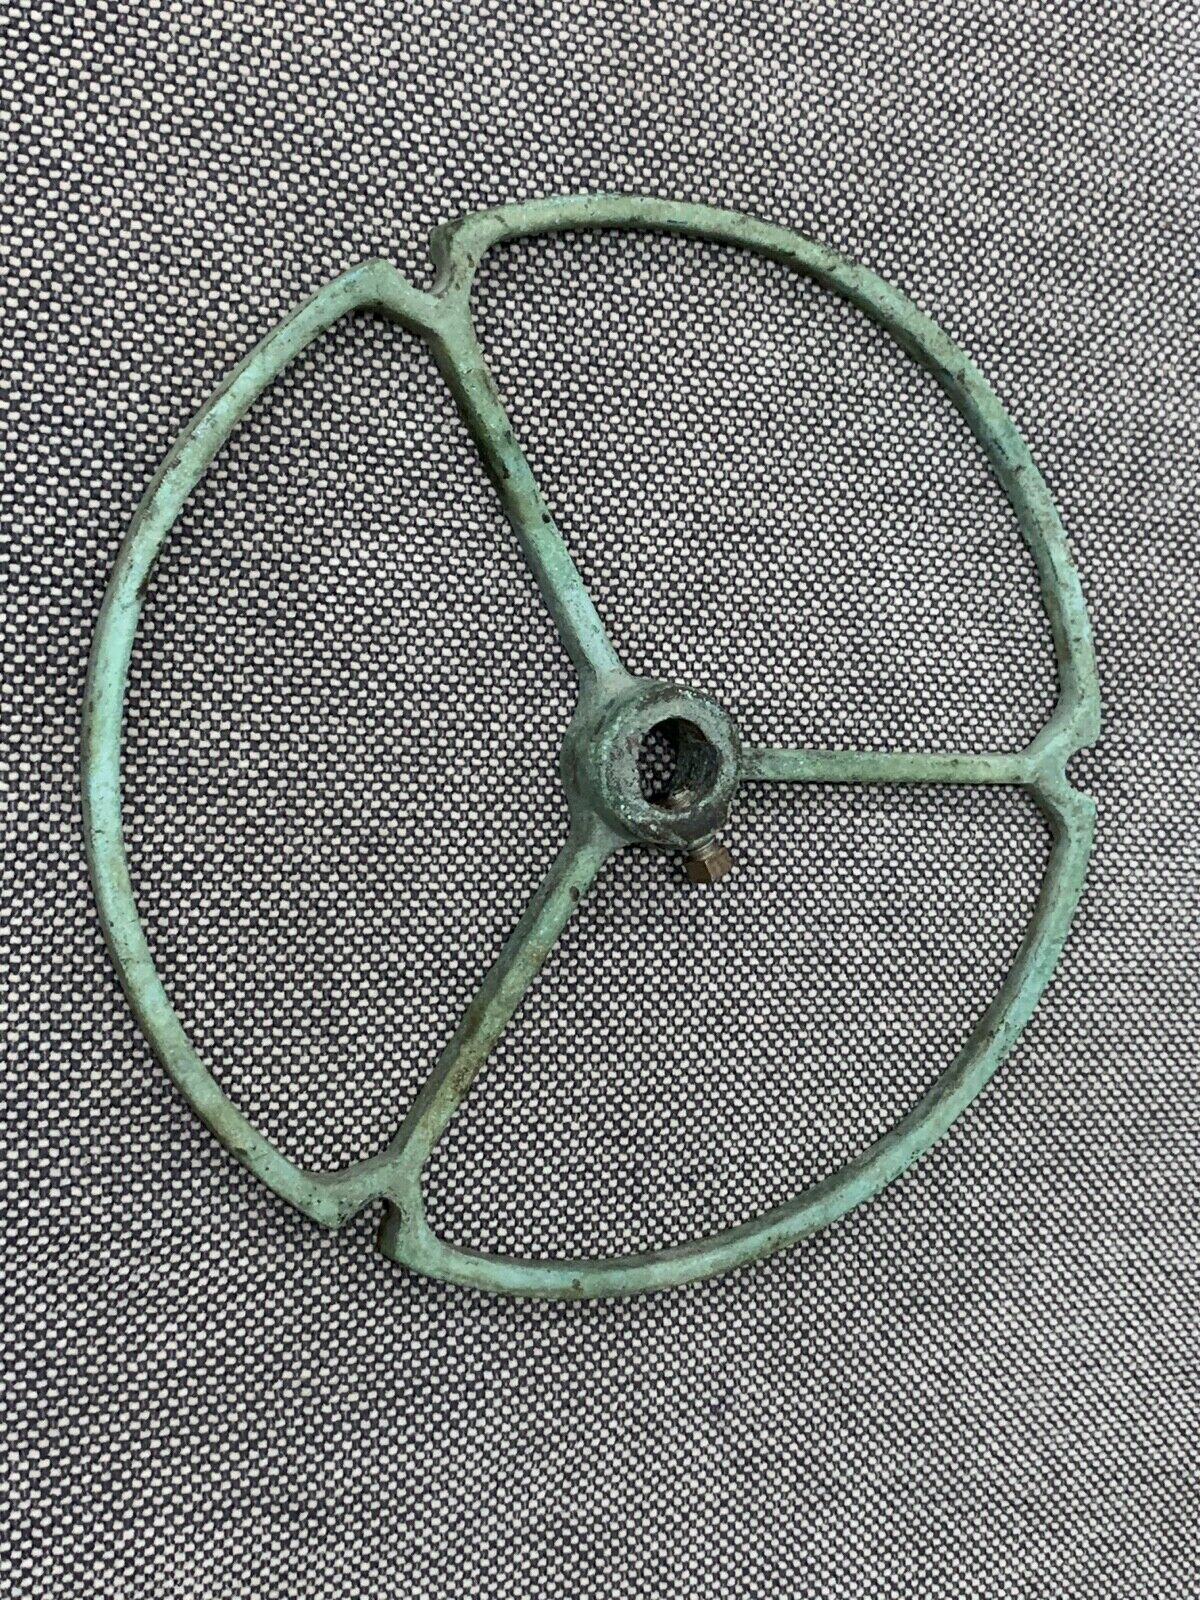 Vintage Green Oxidized Metal Possibly Nautical Wheel / Mounting Mechanism